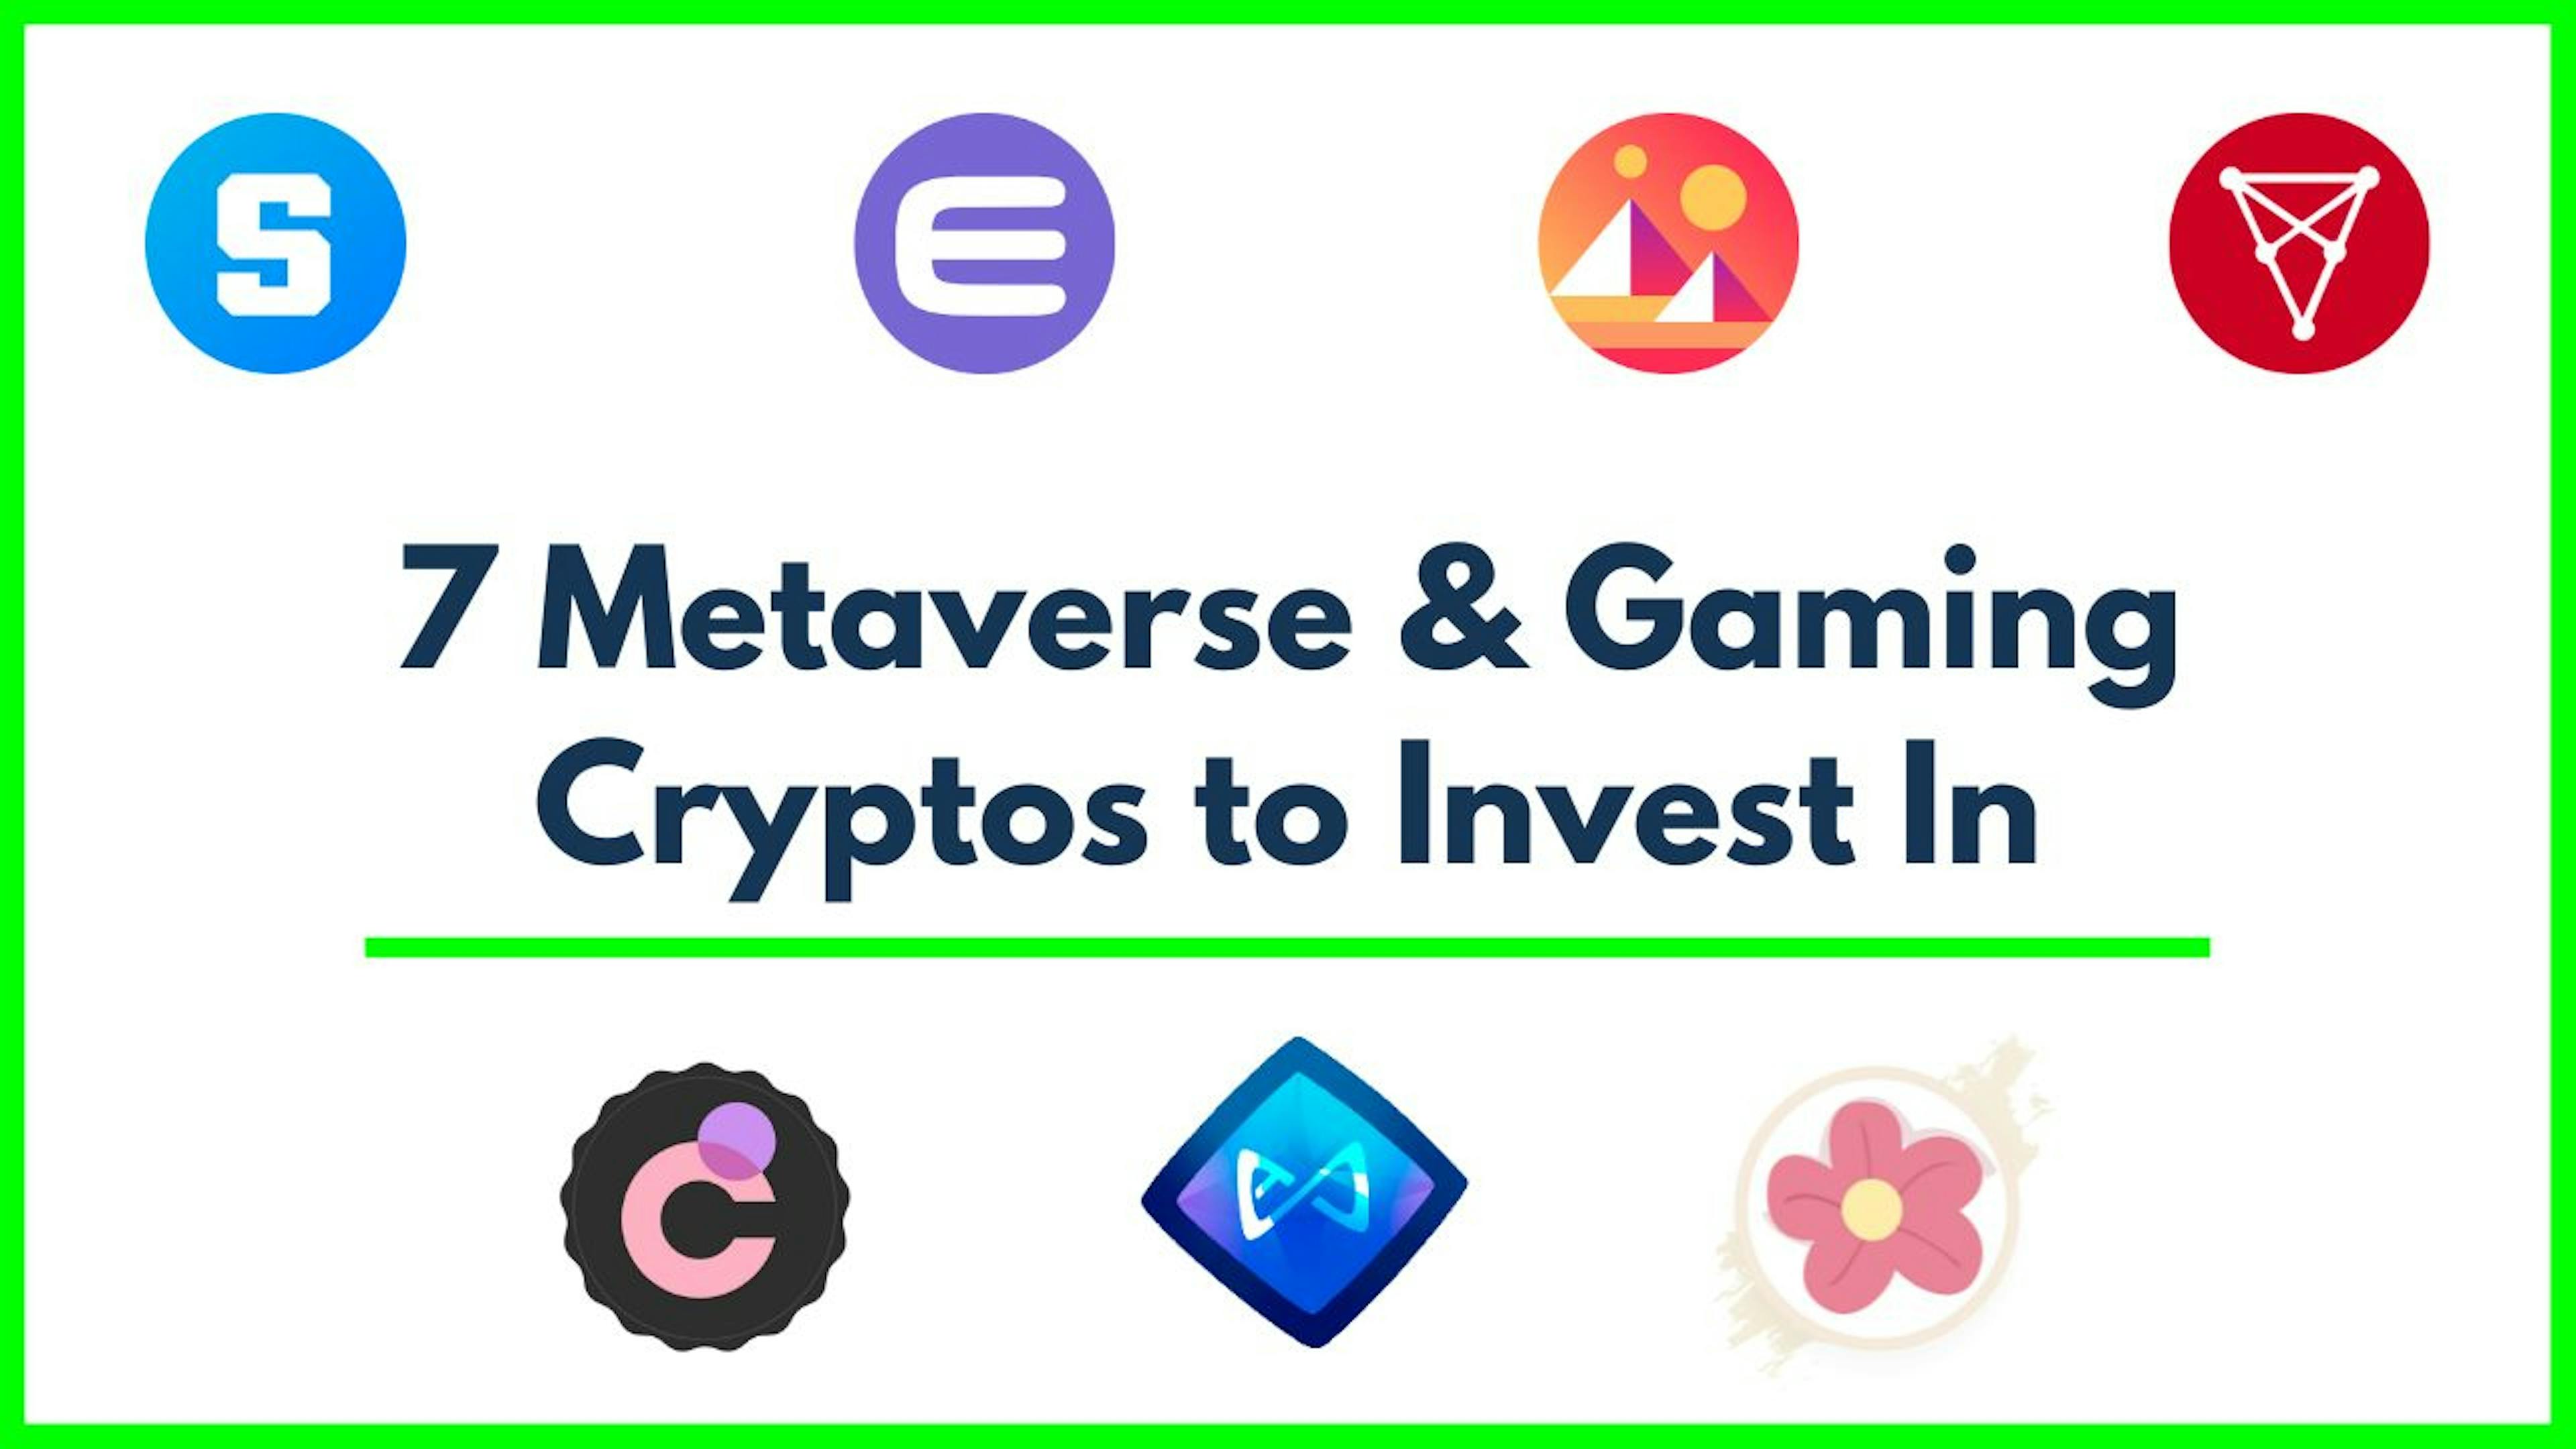 /7-metaverse-and-gaming-cryptocurrencies-to-invest-in-2021-2022 feature image